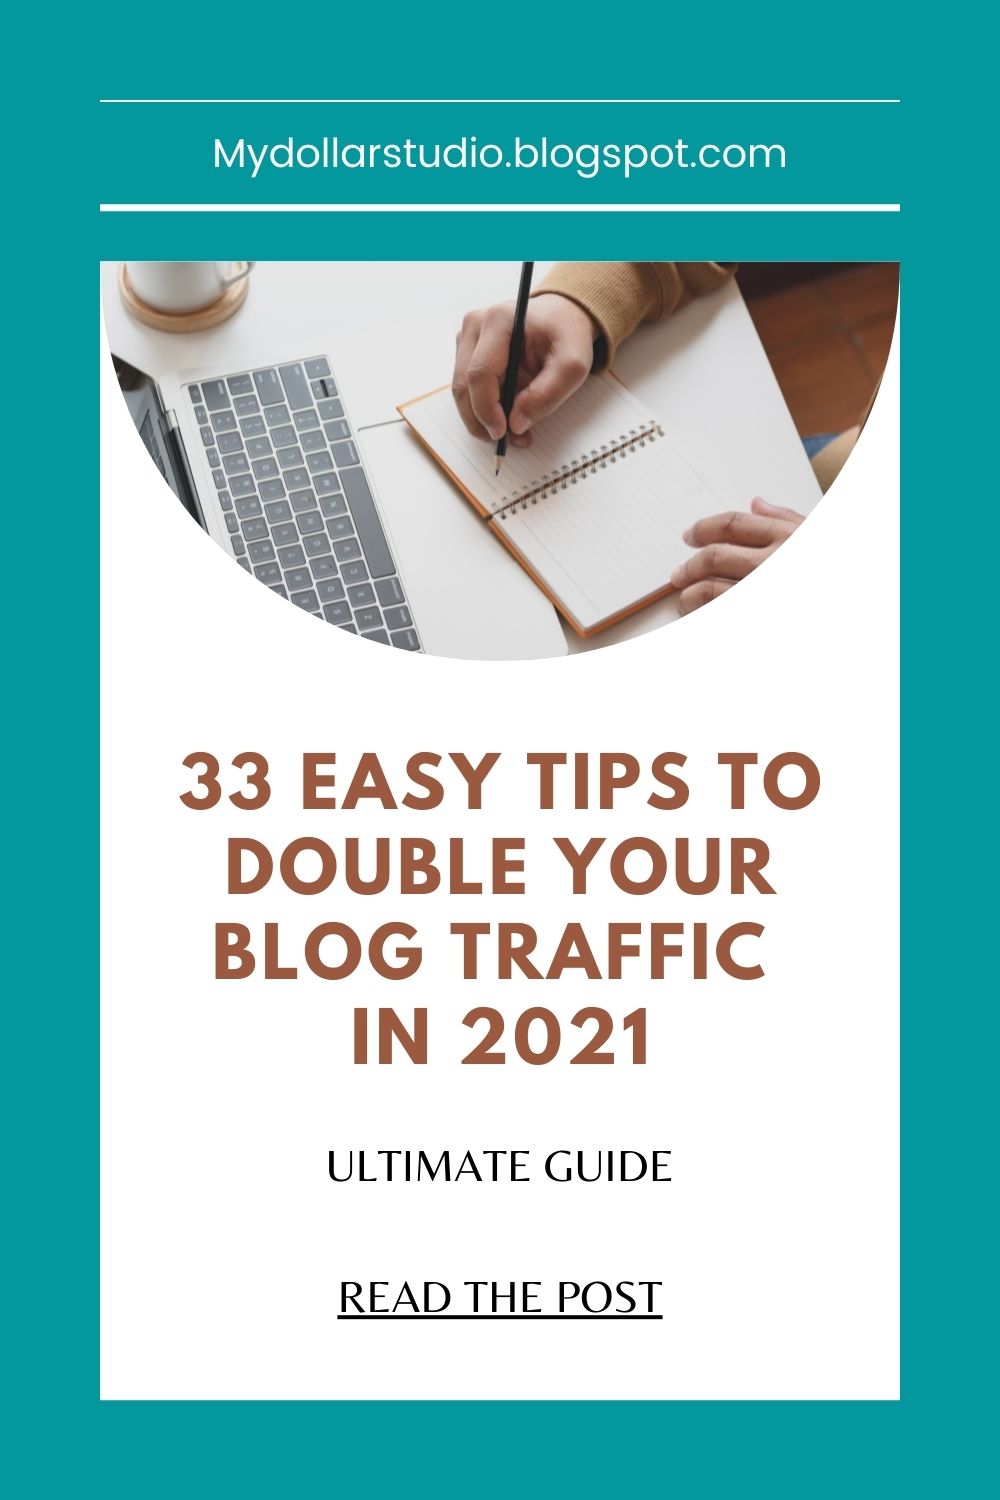 33-easy-tips-to-Double-your-blog-traffic-in-2021.jpg